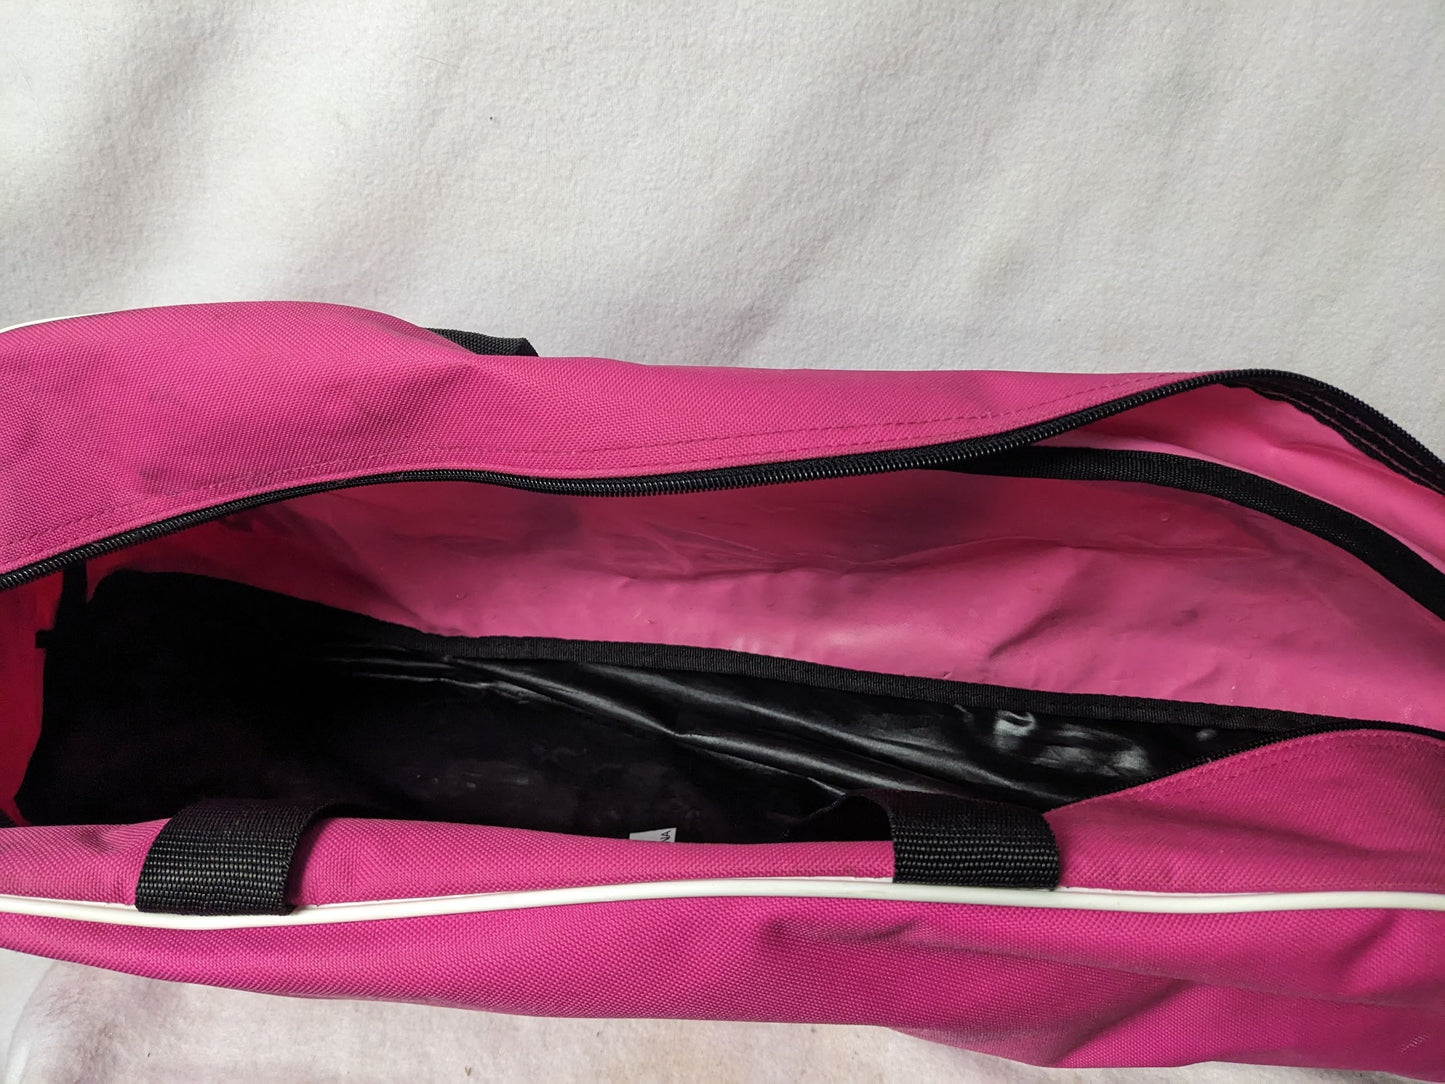 Easton Baseball/Softball Tote Bag Size 35 In Color Pink Condition Used